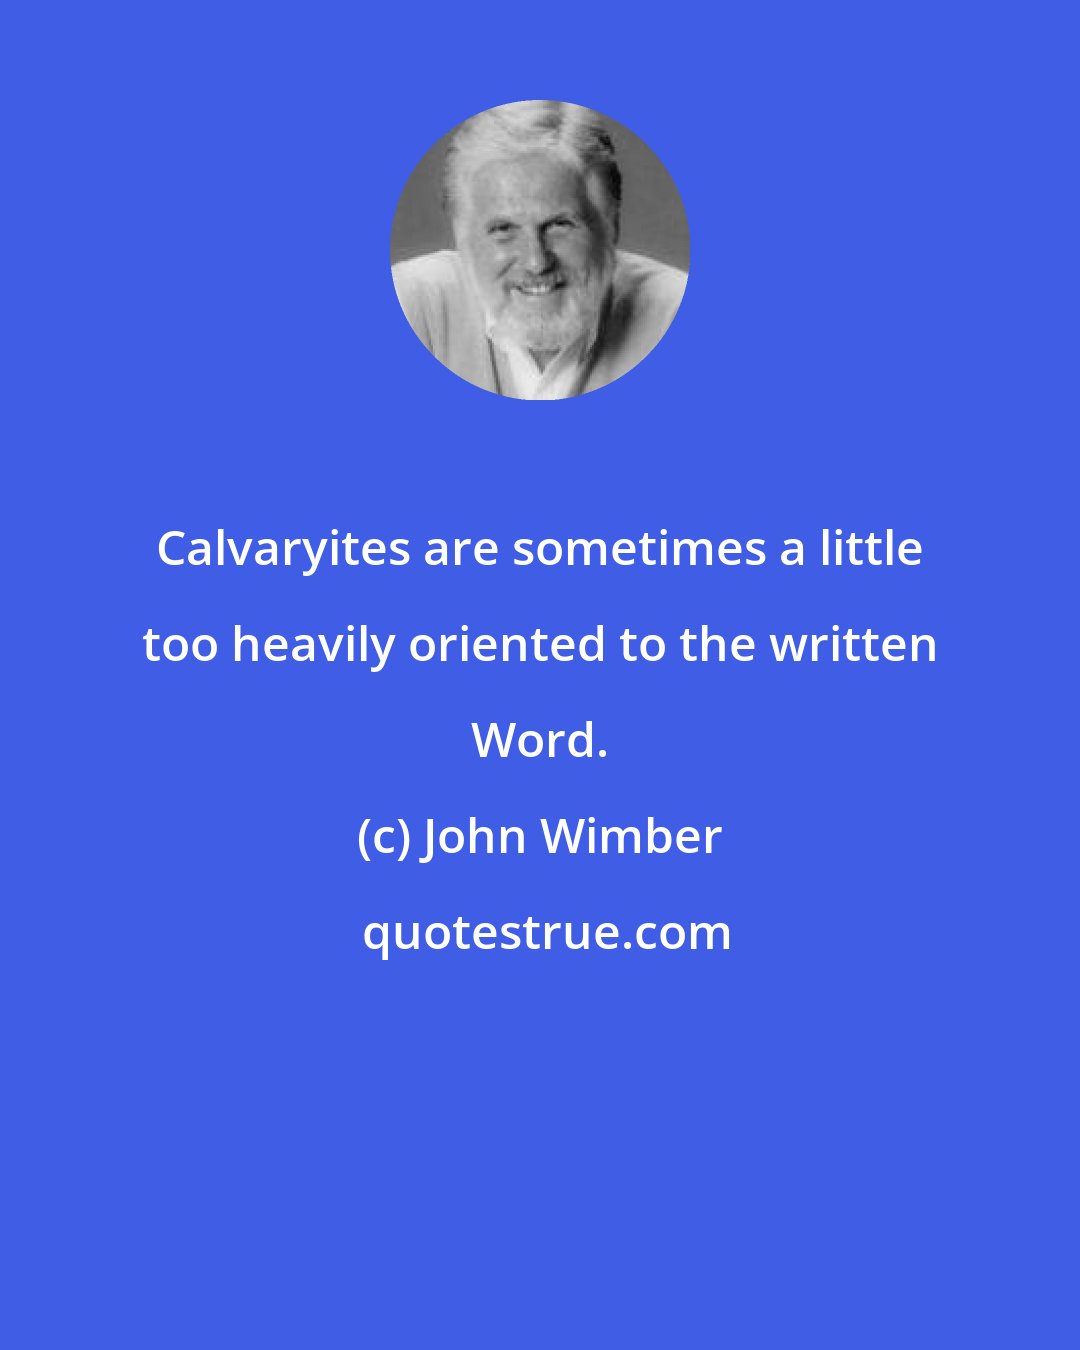 John Wimber: Calvaryites are sometimes a little too heavily oriented to the written Word.